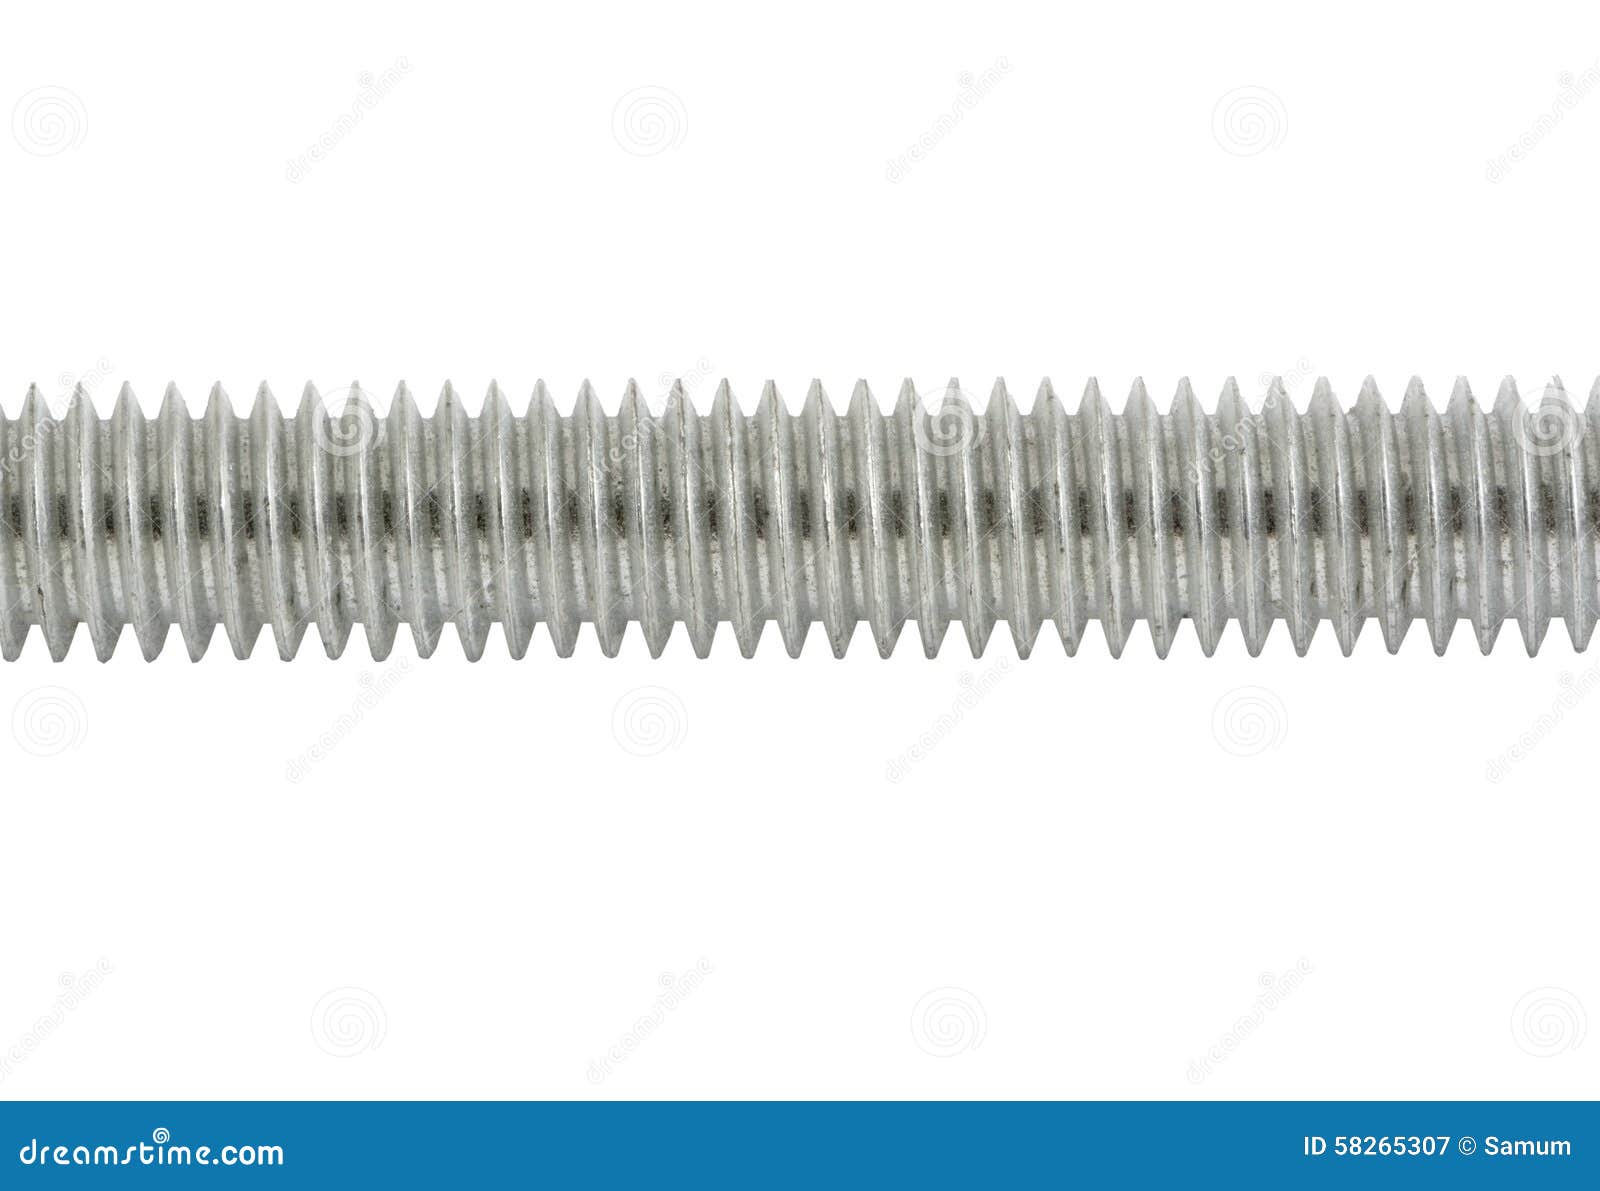 studbolts or threaded steel rods